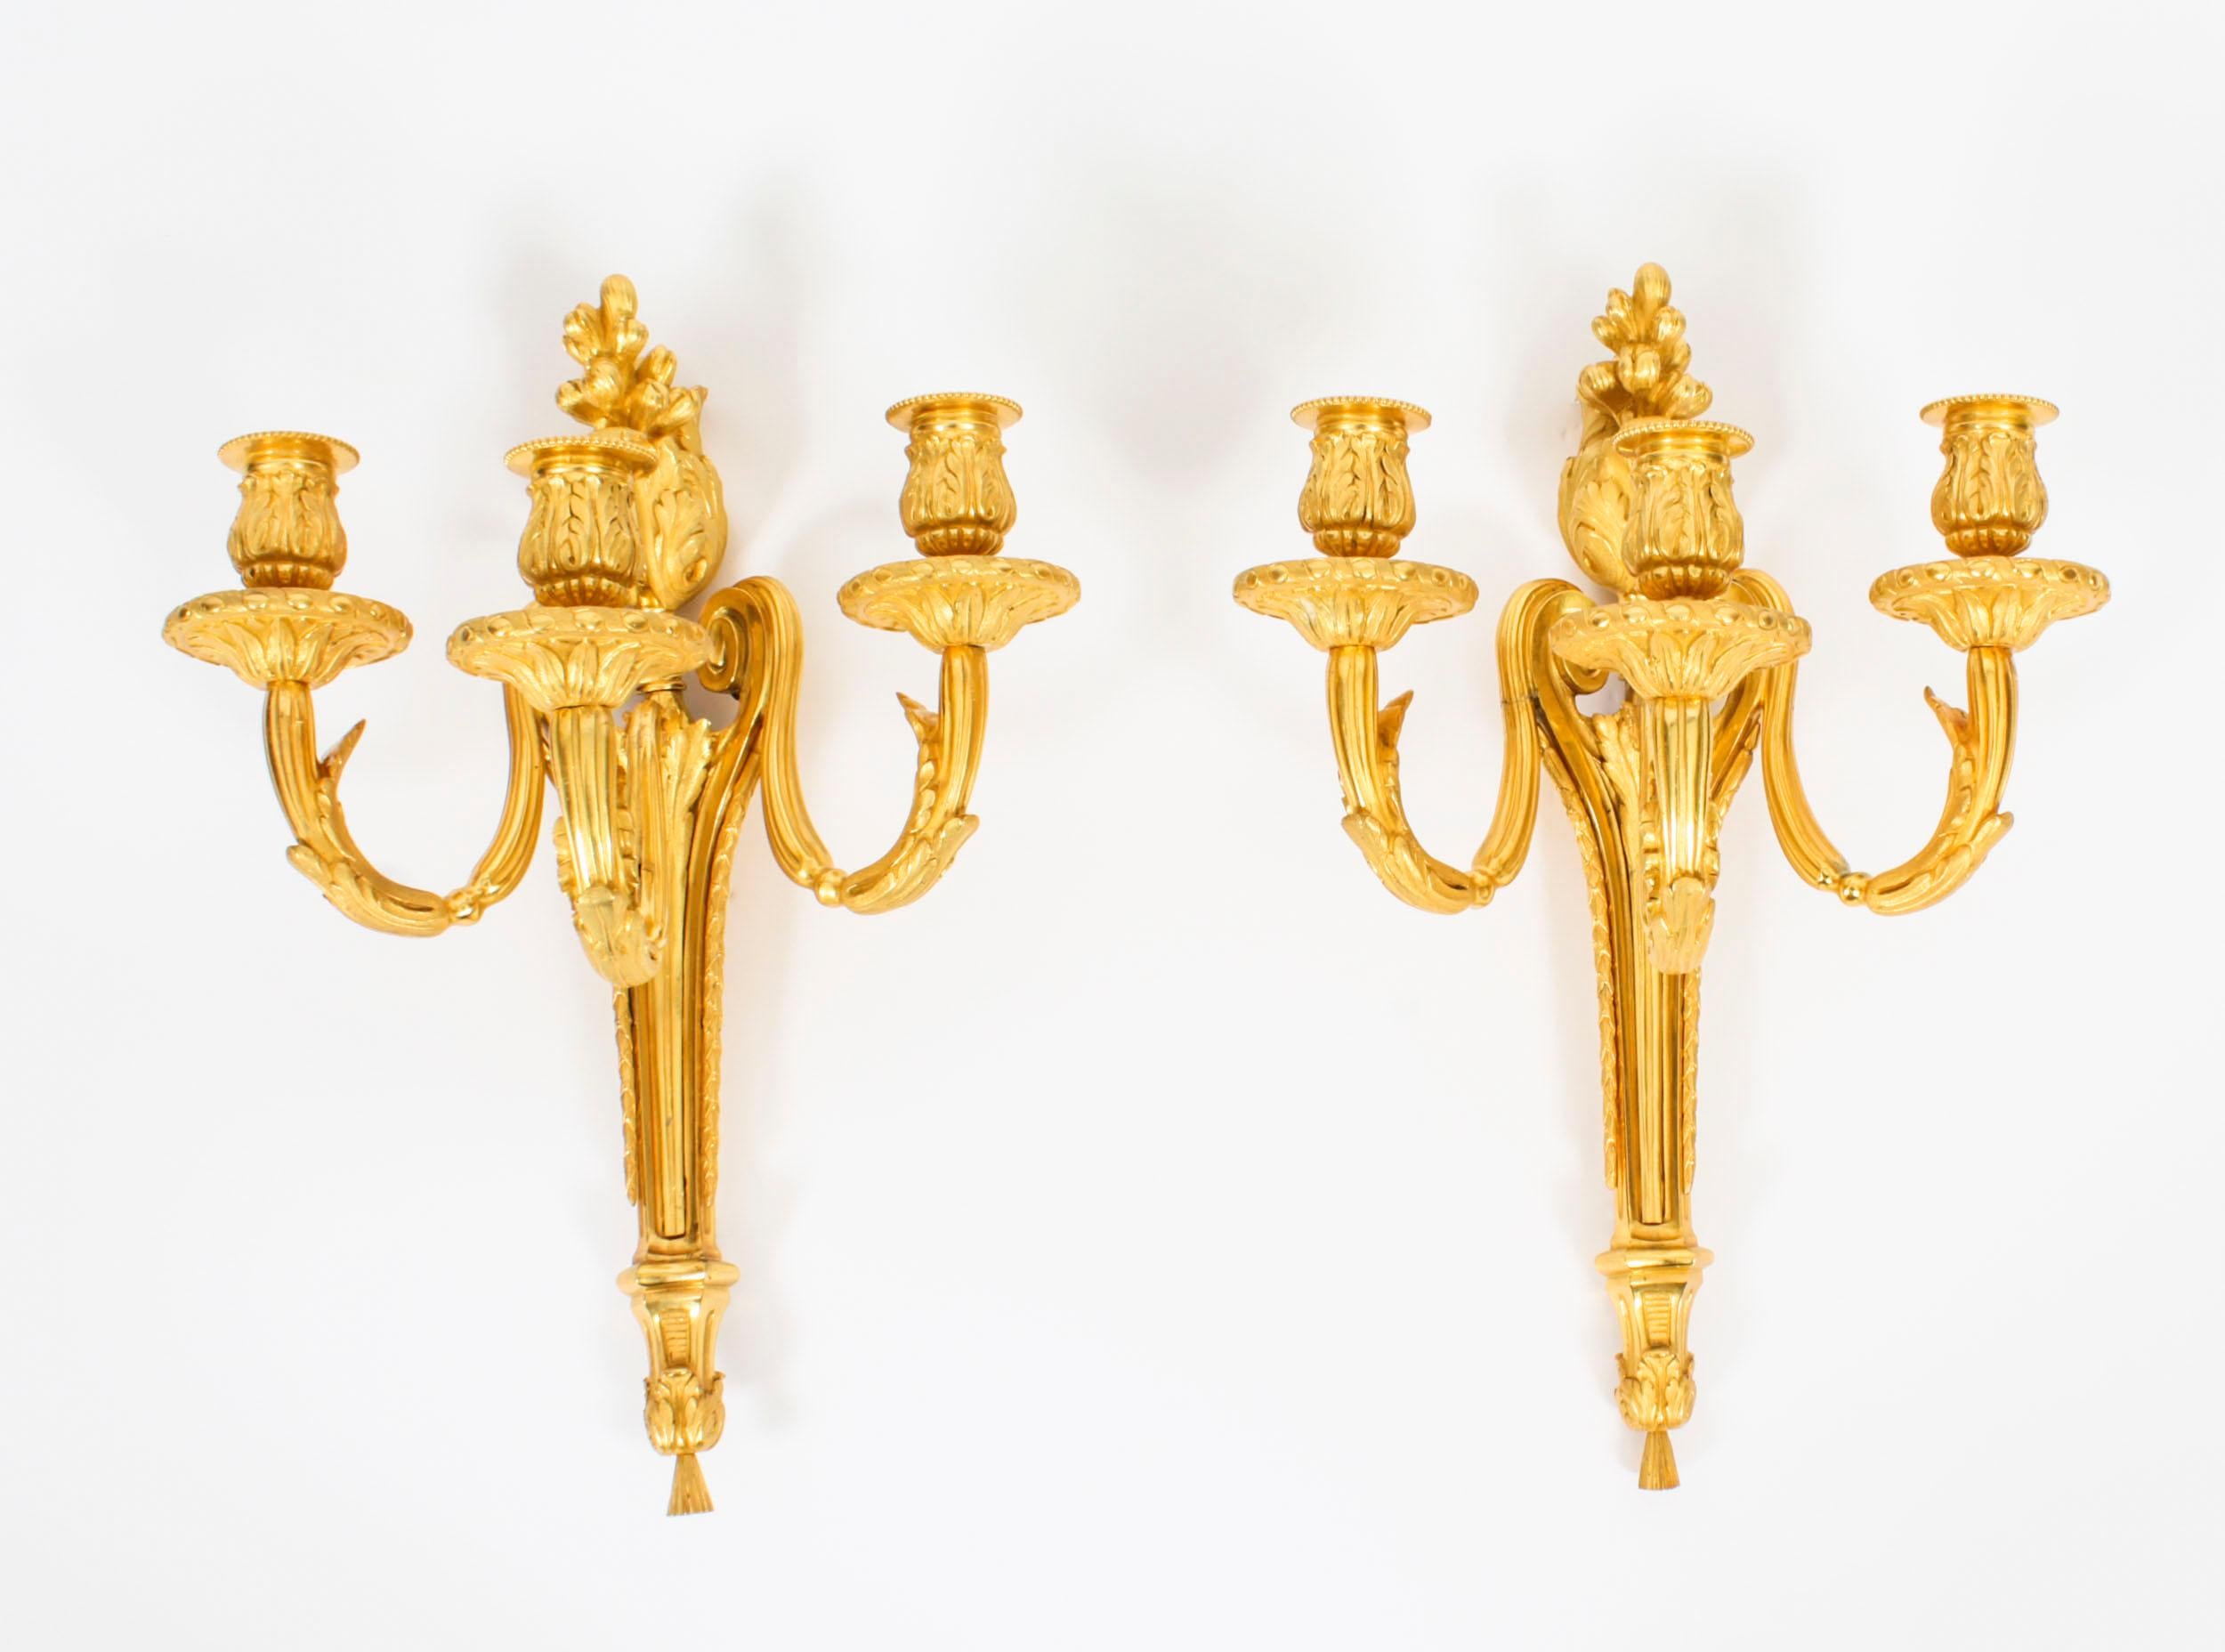 This is a stunning pair of Adam Revival antique gilded ormolu triple branch candle wall lights, dating from the Circa 1840.

Each wall light has a tapering body, supporting a spiral twist and acanthus cast candelearm terminating in gadrooned sockets